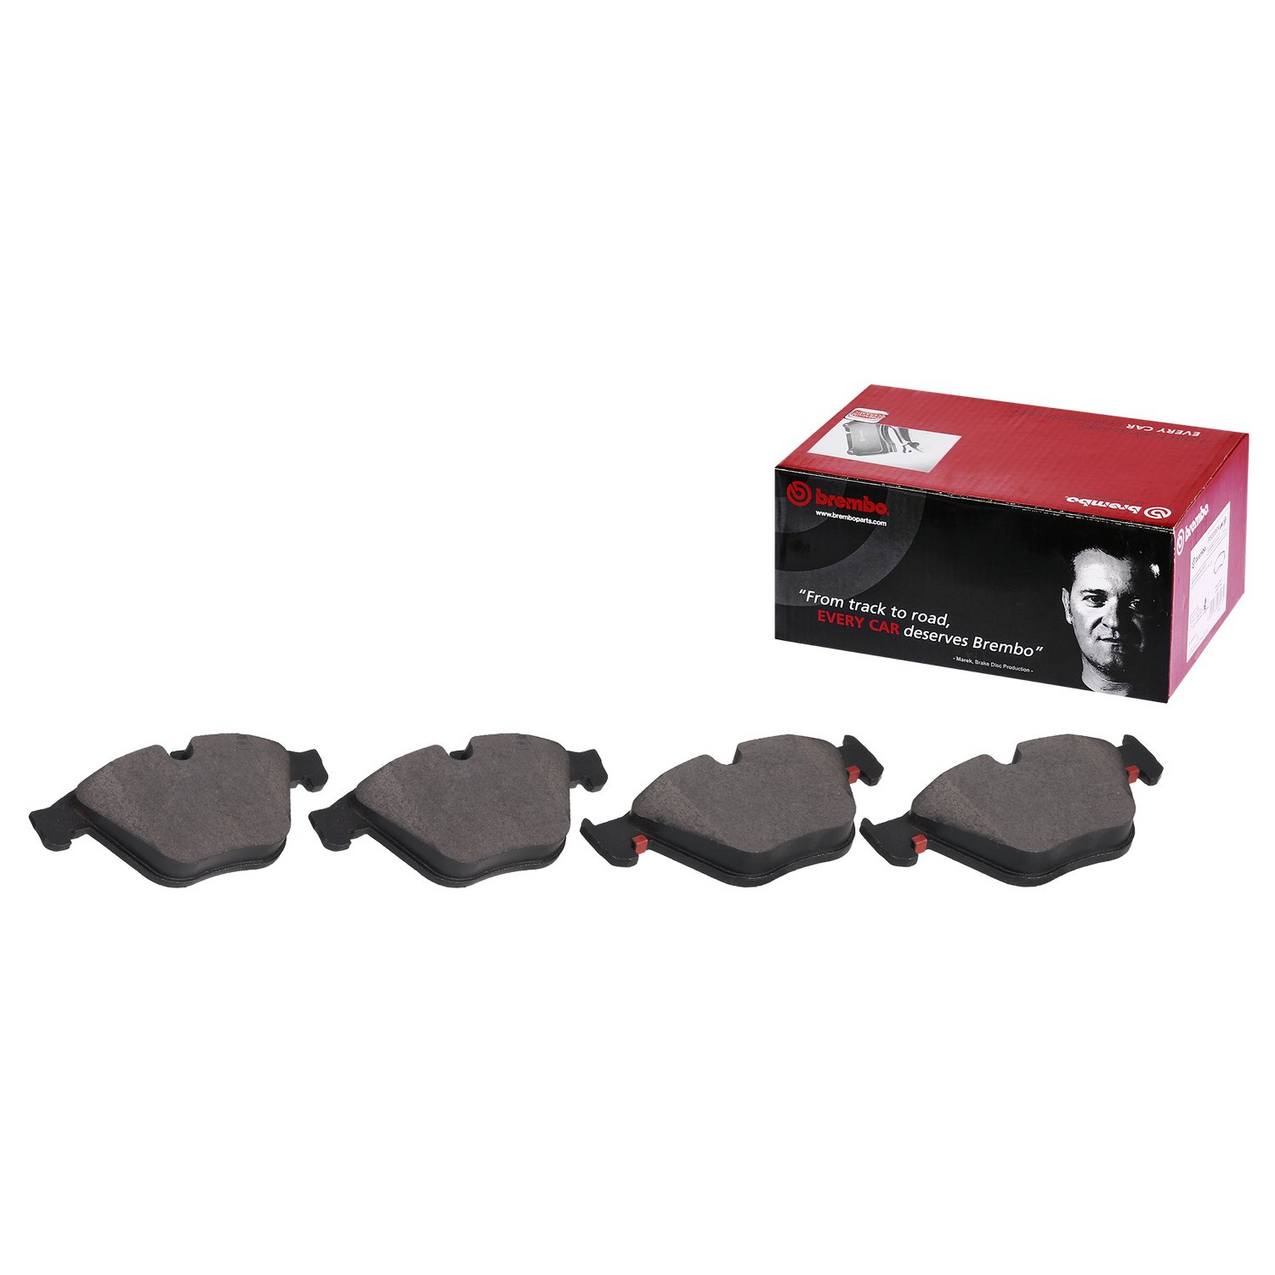 BMW Disc Brake Pad and Rotor Kit - Front (328mm) (Ceramic) (Xtra) Brembo